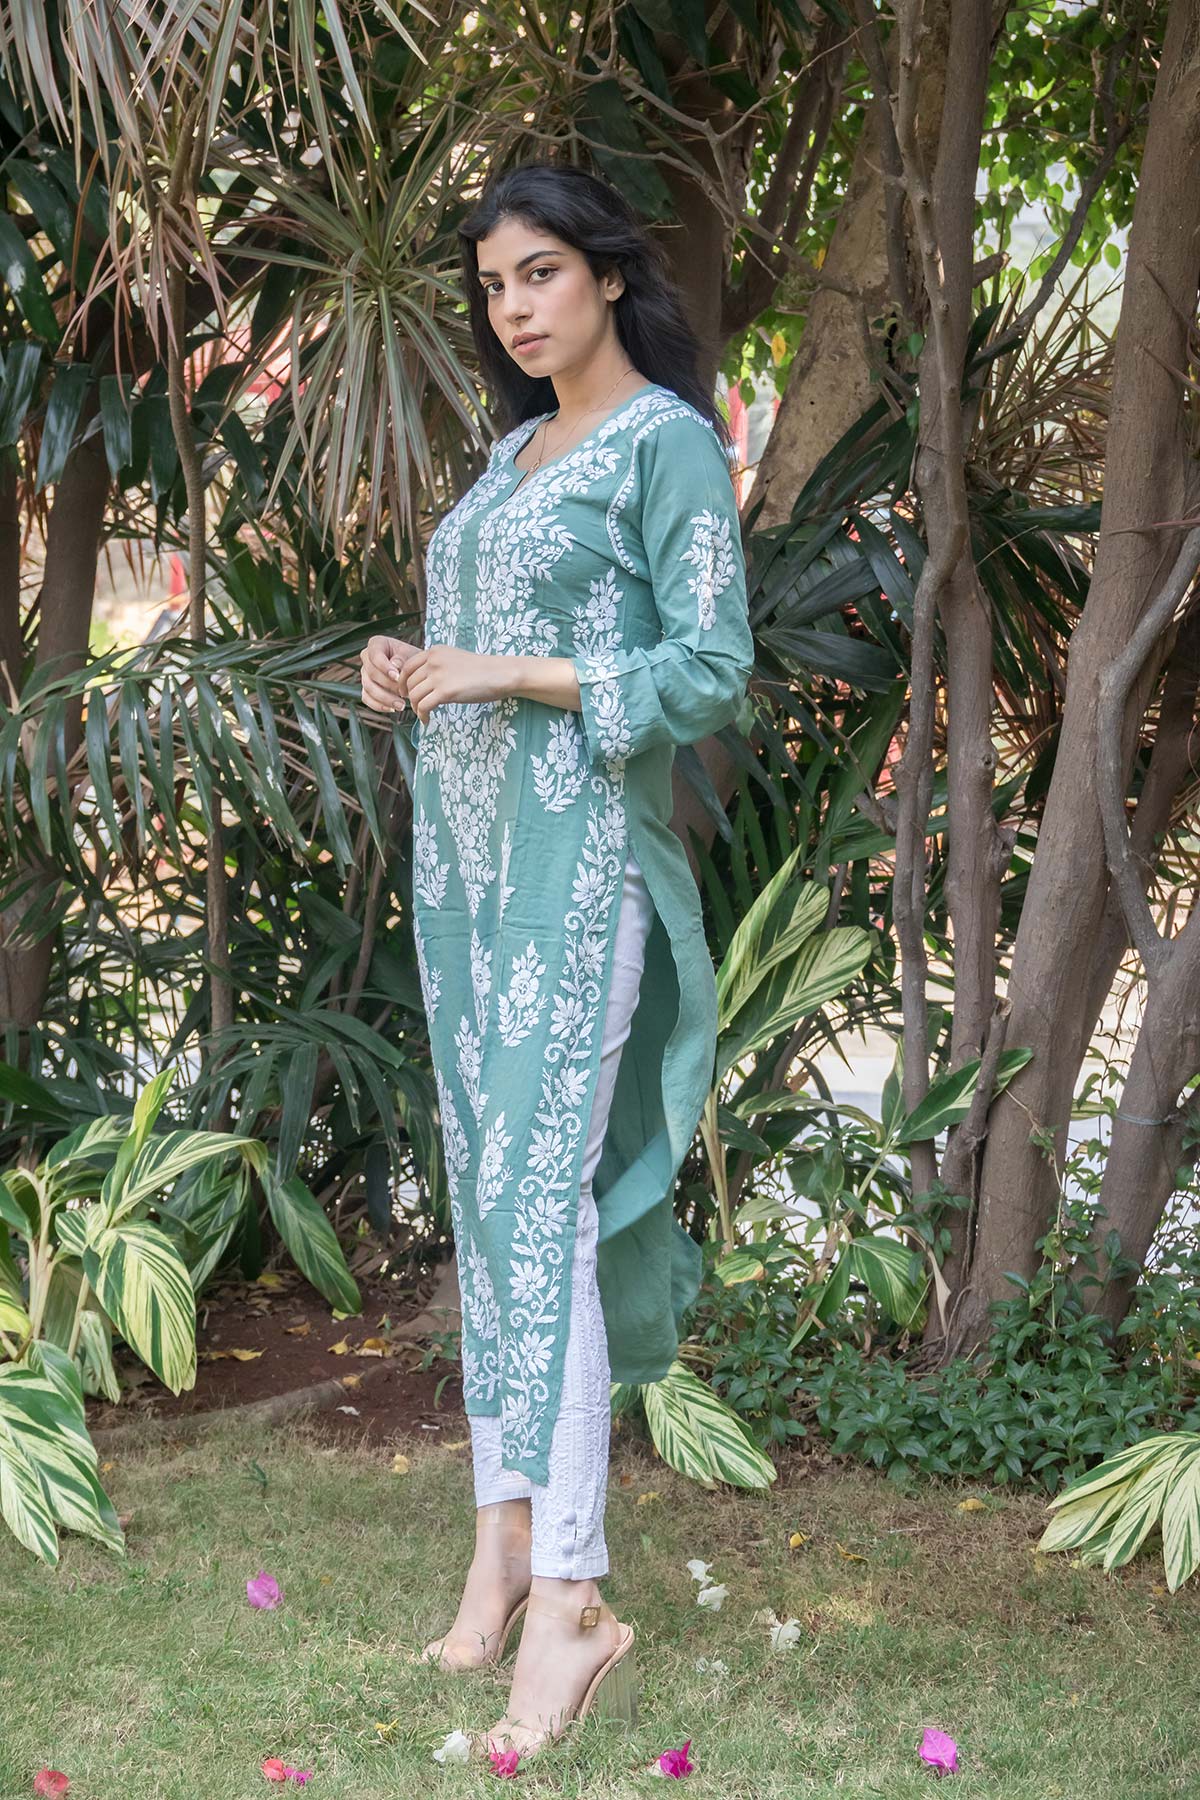 Embrace Elegance and Style with Designer Kurtis from Zola